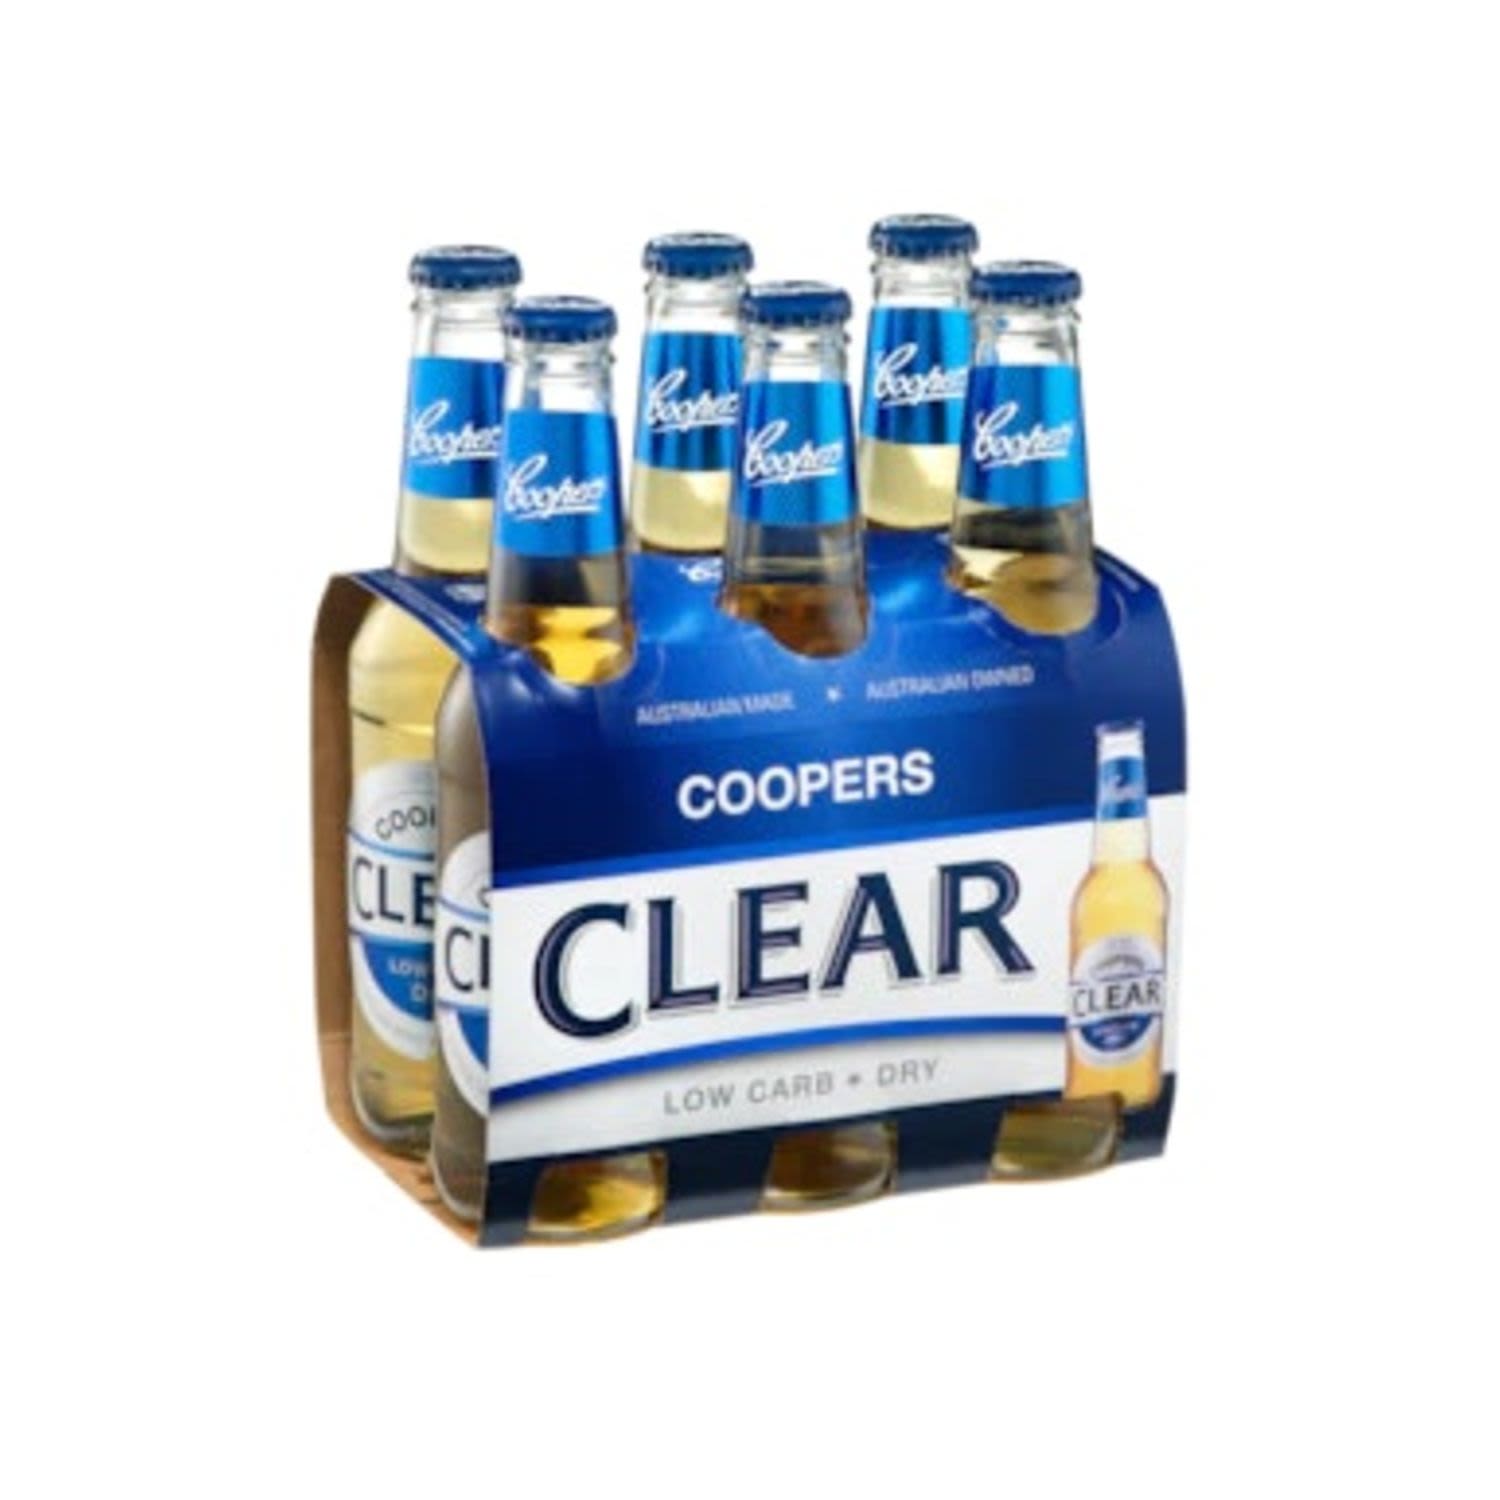 Coopers Clear Low Carb Bottle 355mL 6 Pack